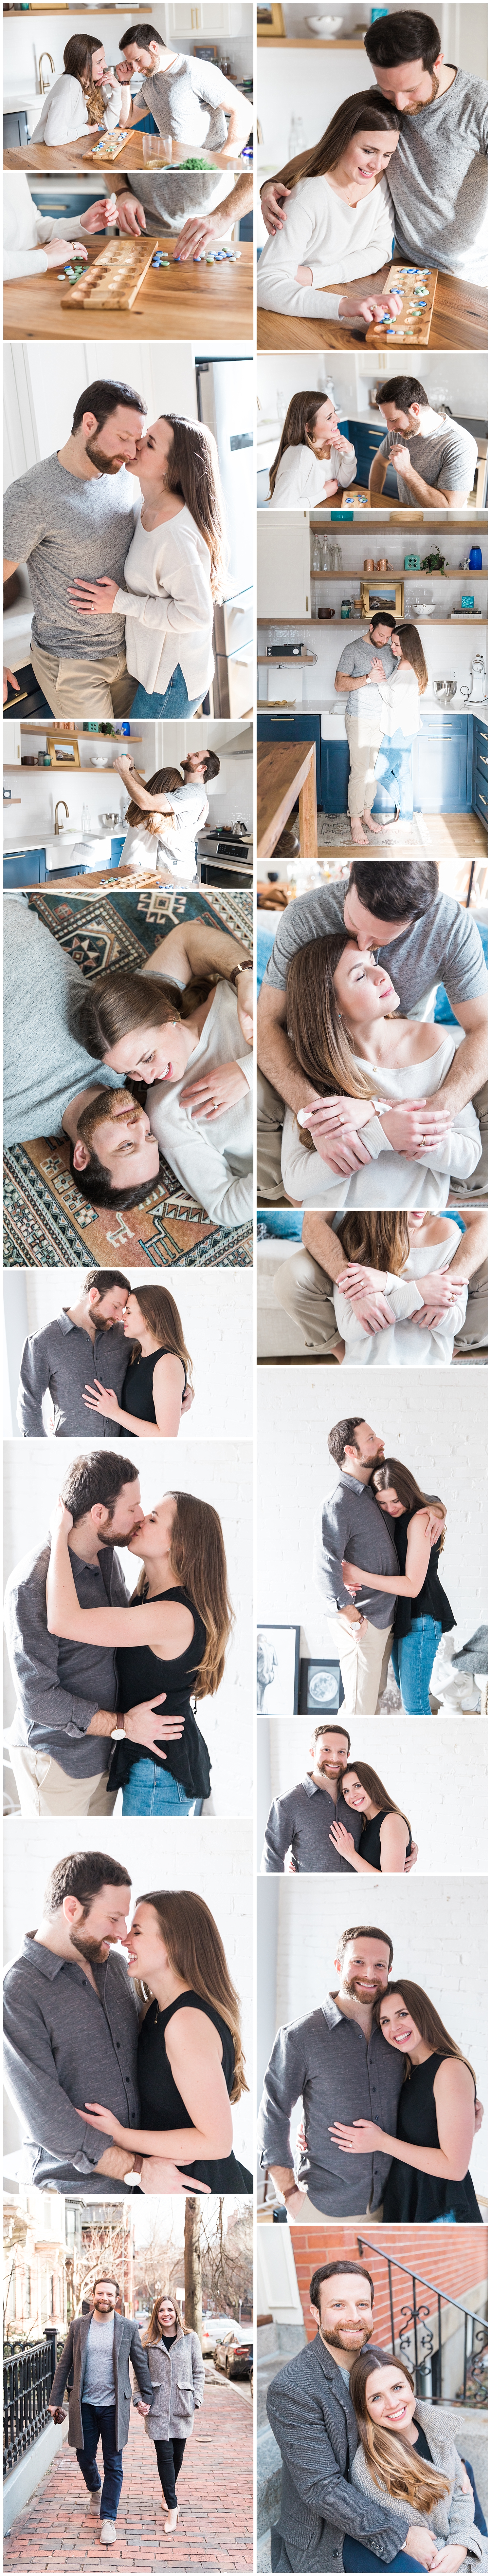 Lifestyle engagement session in the South End, Boston. Couple baking cookies and photography by halie.